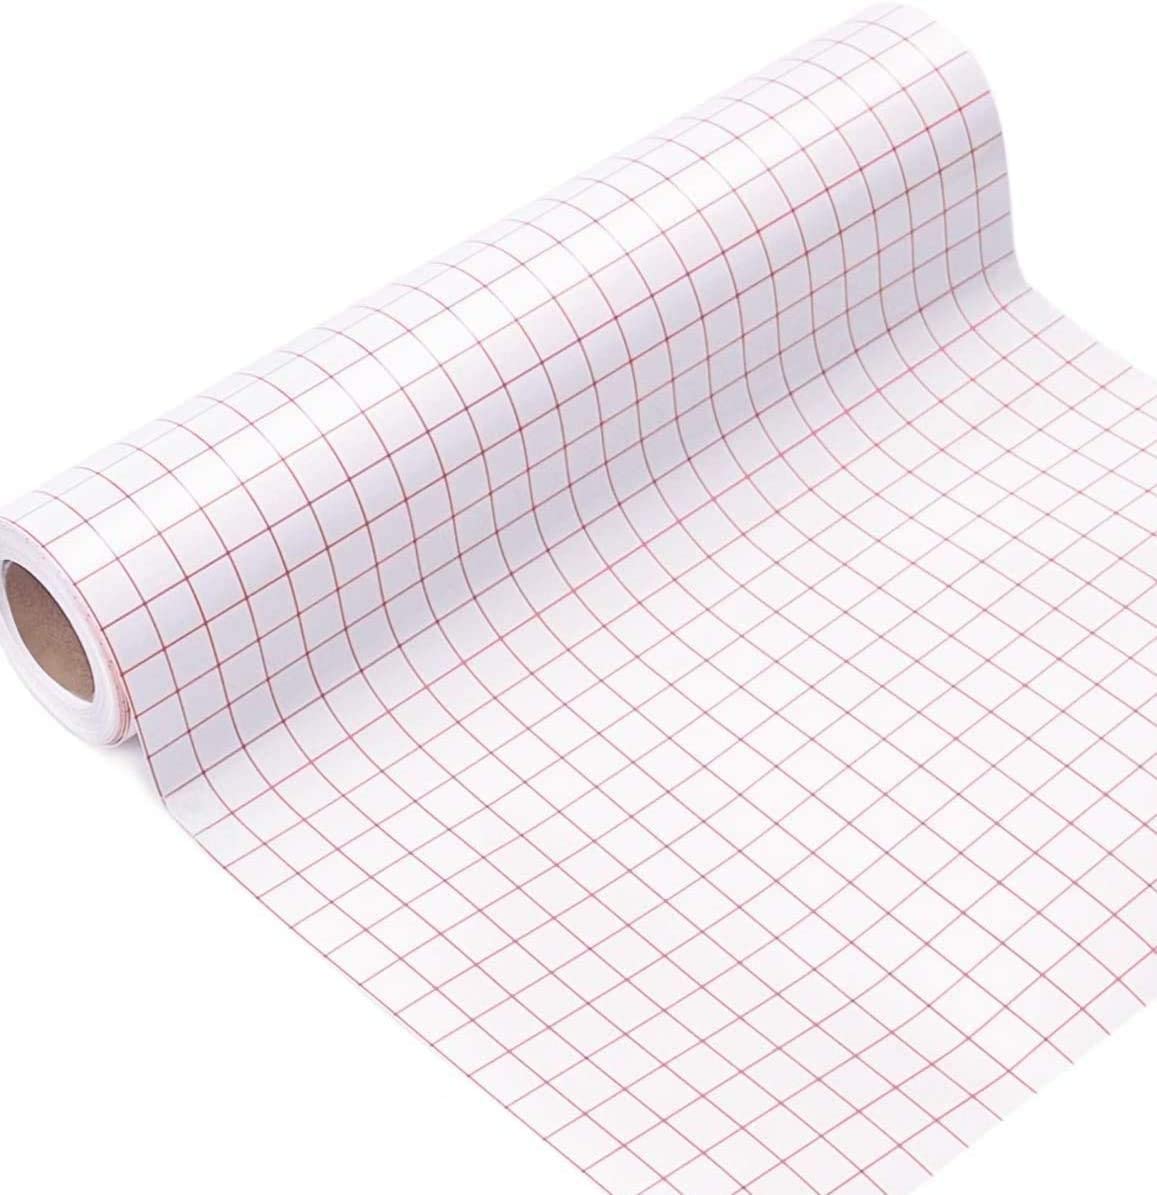 One Roll Transfer Tape For Viny Red Alignment Grid Clear - Temu